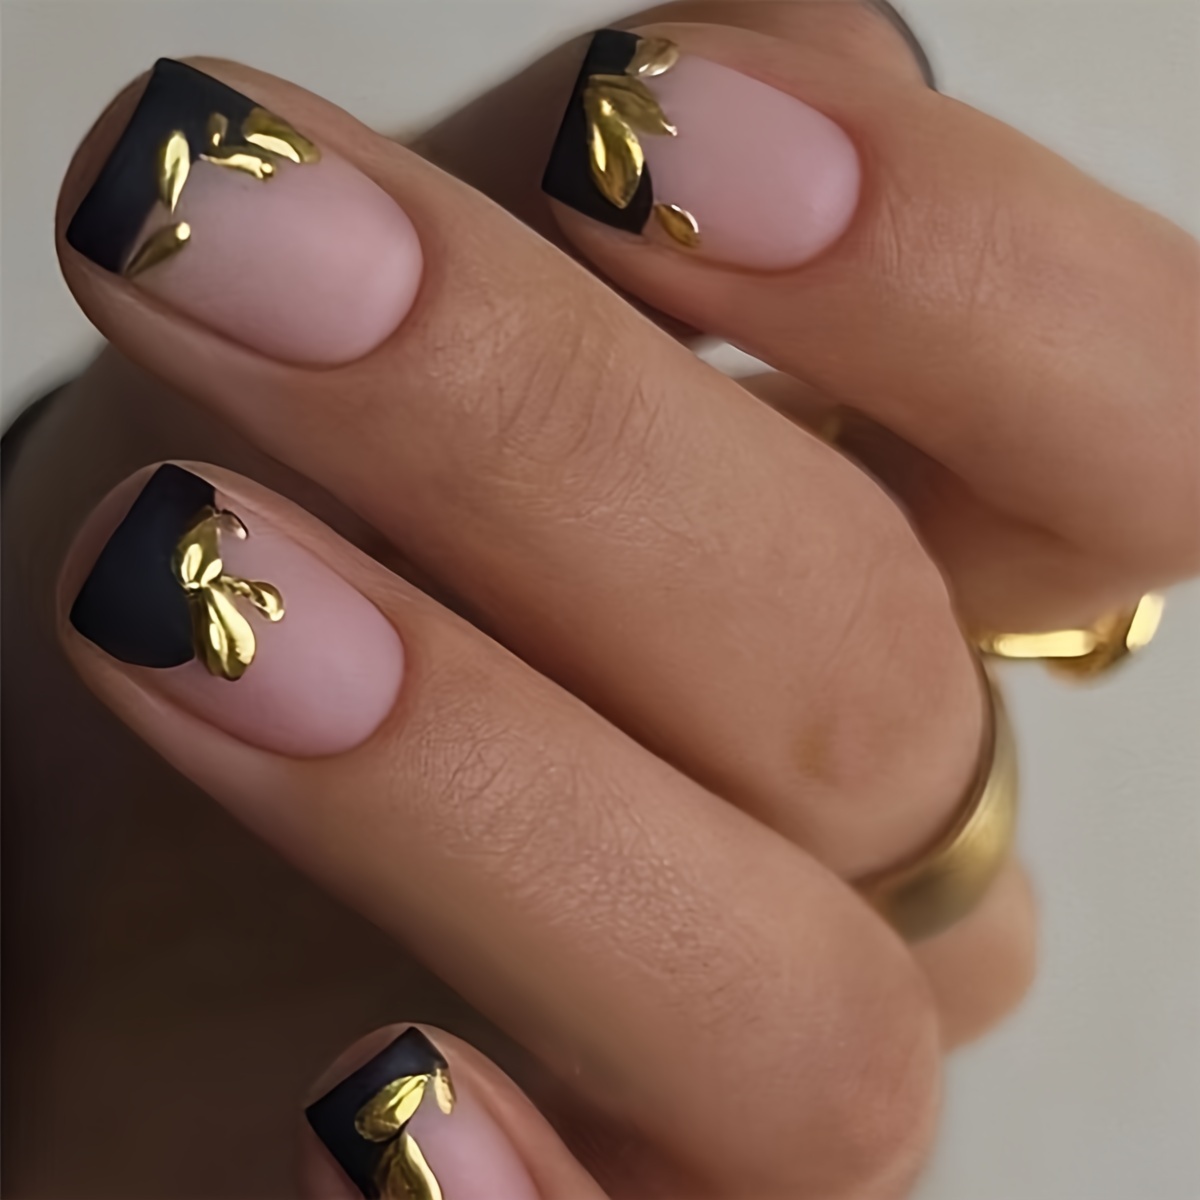 

24pcs Matte Black French Fake Nails Nude Golden Color Blocks Pattern With Design Pinkish Press On Nails Short Square False Nails Temperament Acrylic Nails For Women And Girls